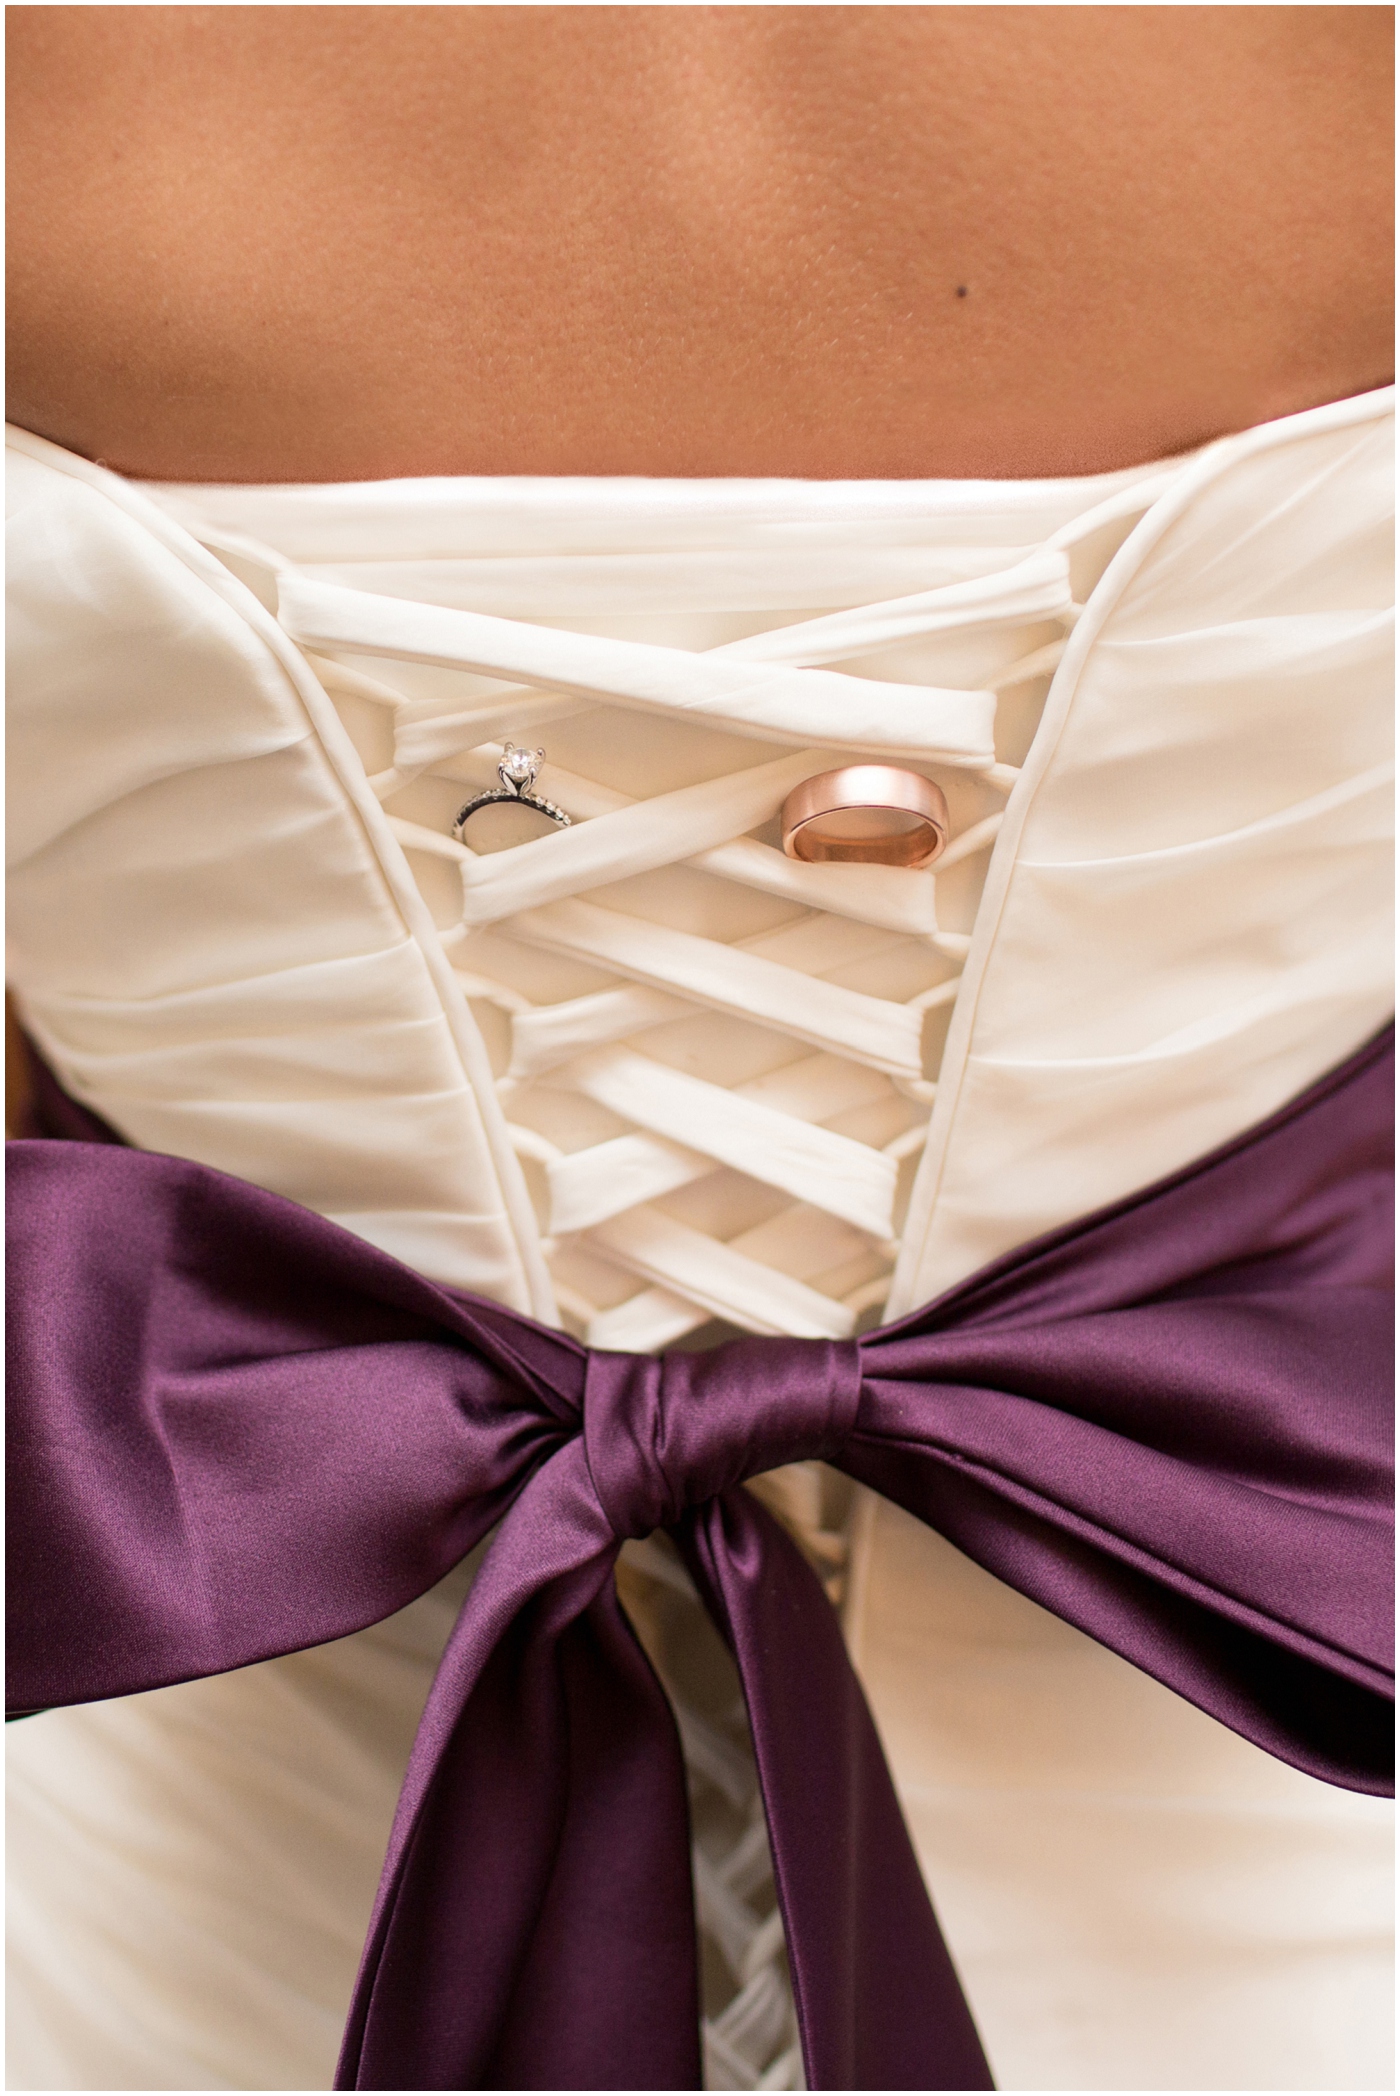 picture of wedding rings on wedding dress